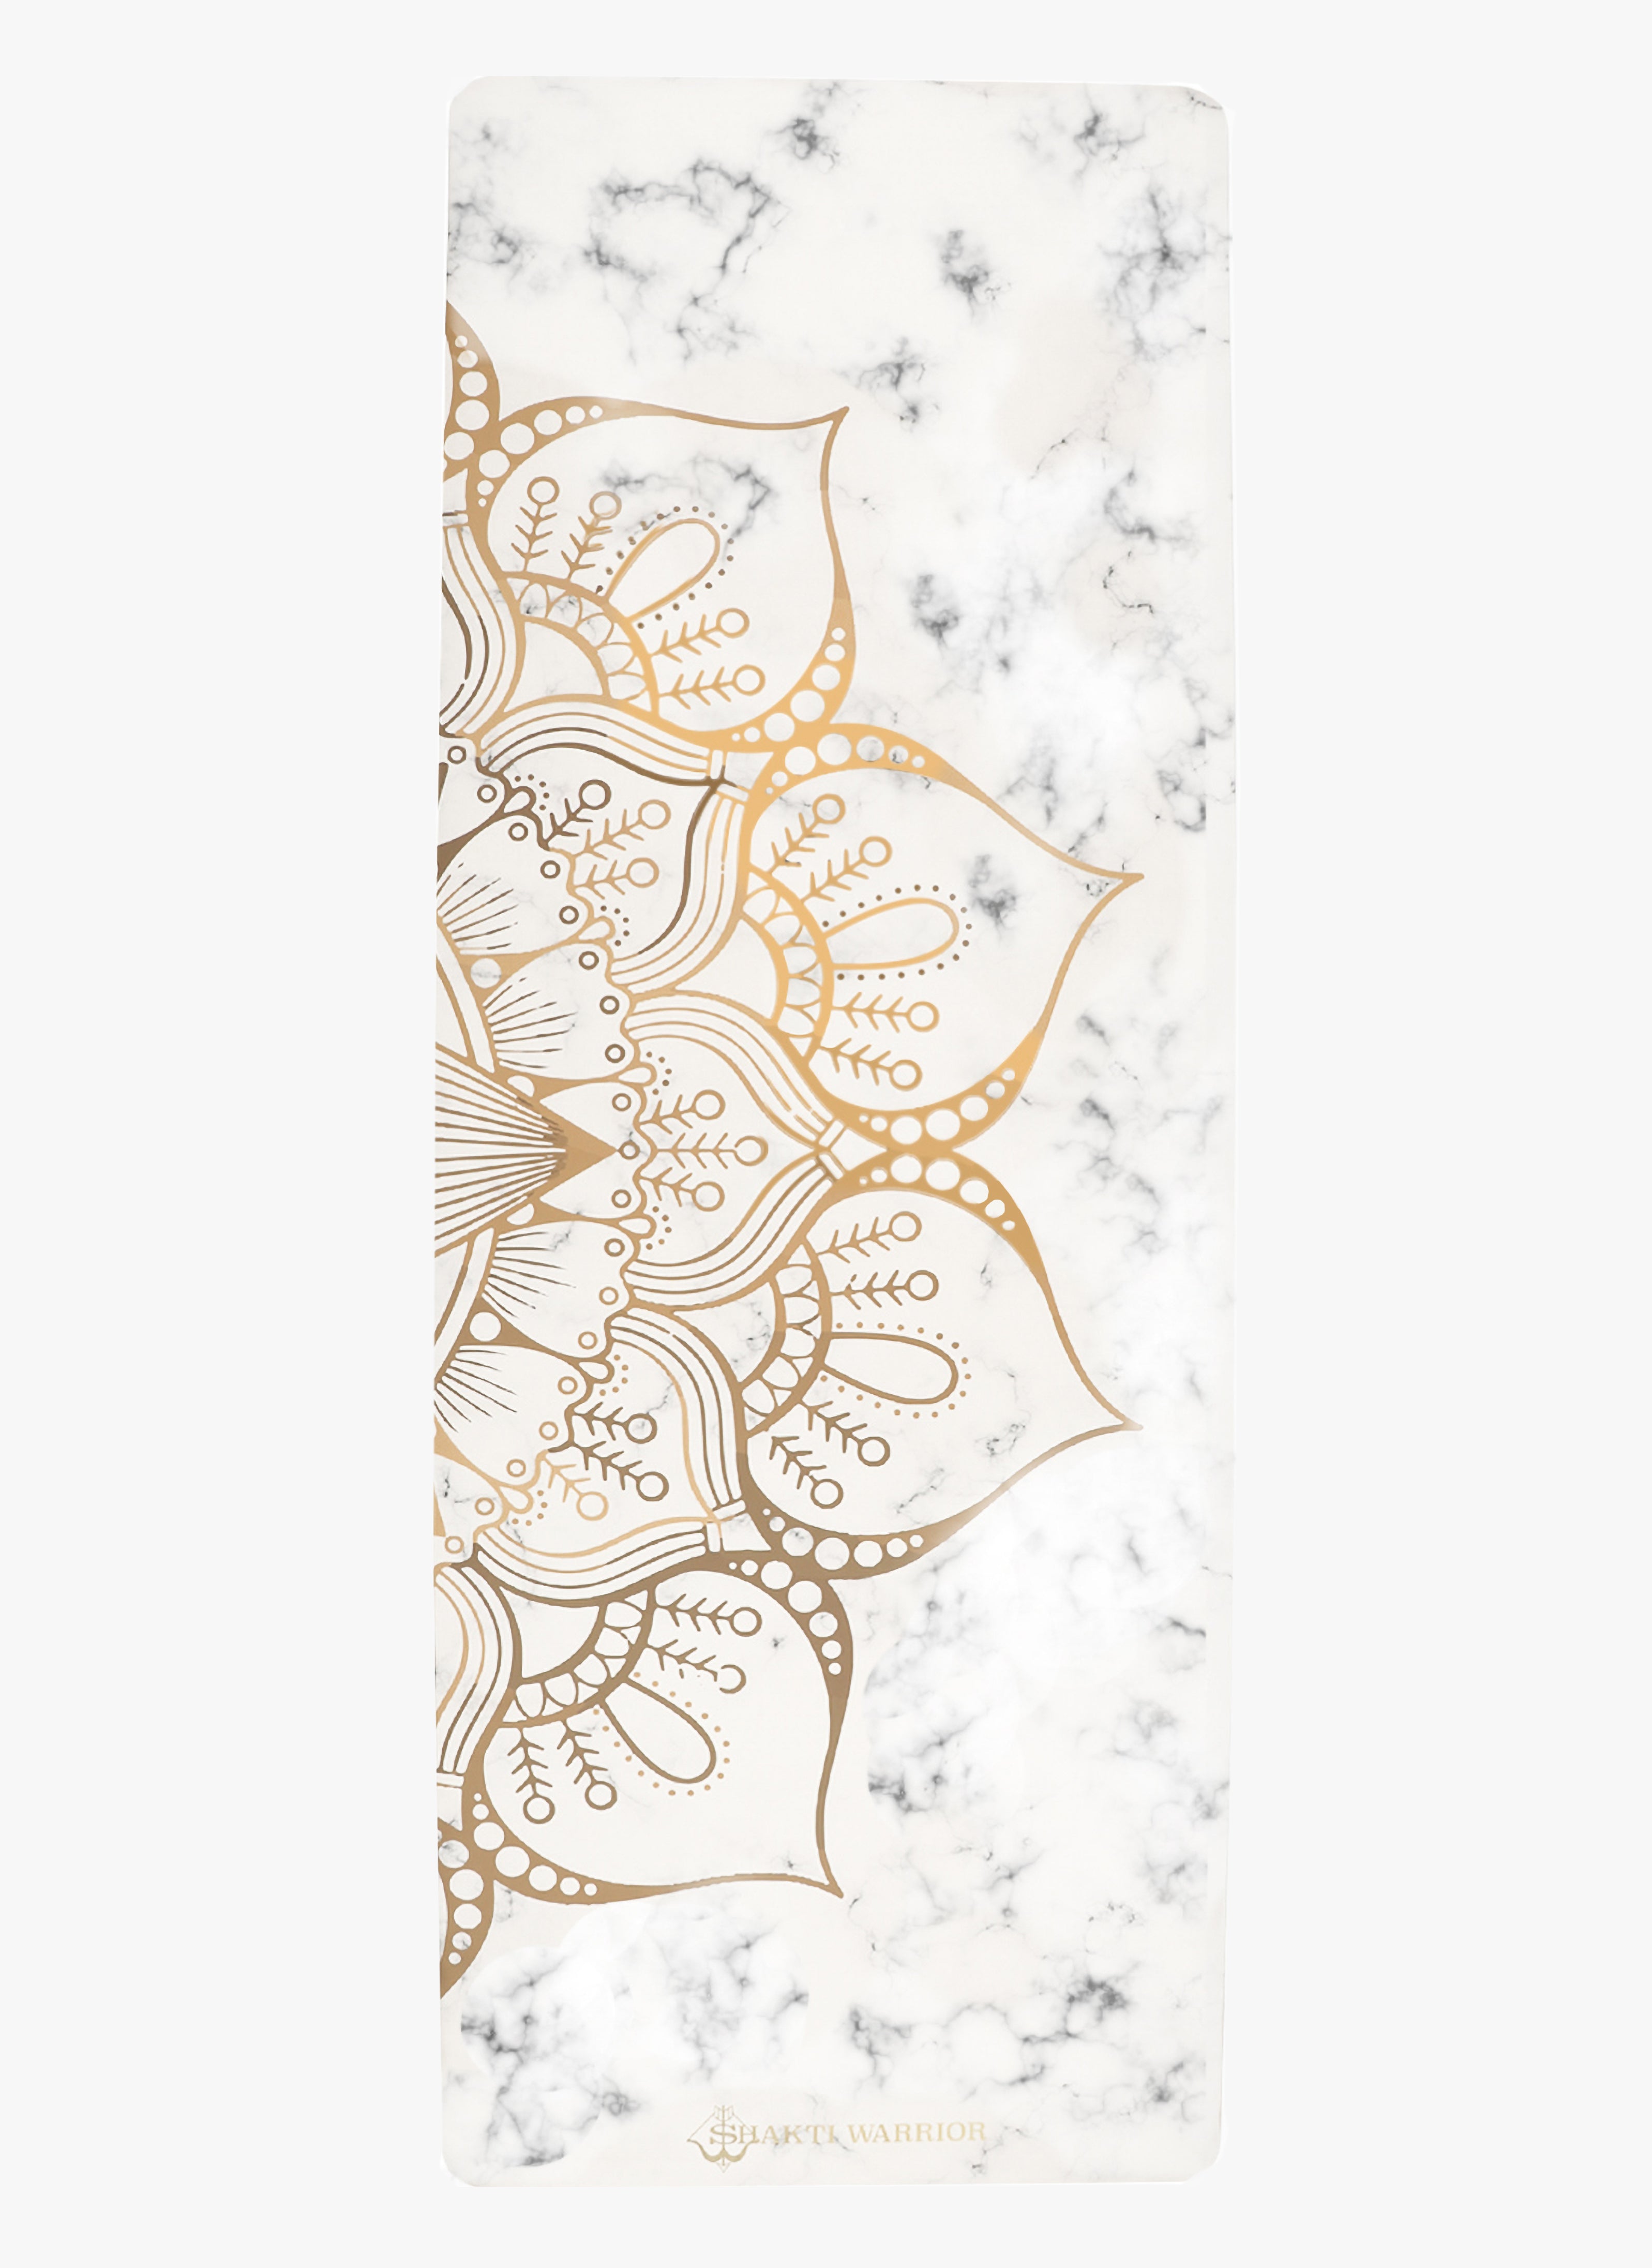 Find serenity on Shakti Warrior's Lotus Recycled PU Yoga Mat. Graceful lotus design on a grippy recycled pu leather surface, wider dimension for enhanced stability. Eco-friendly and perfect for regular and hot yoga.